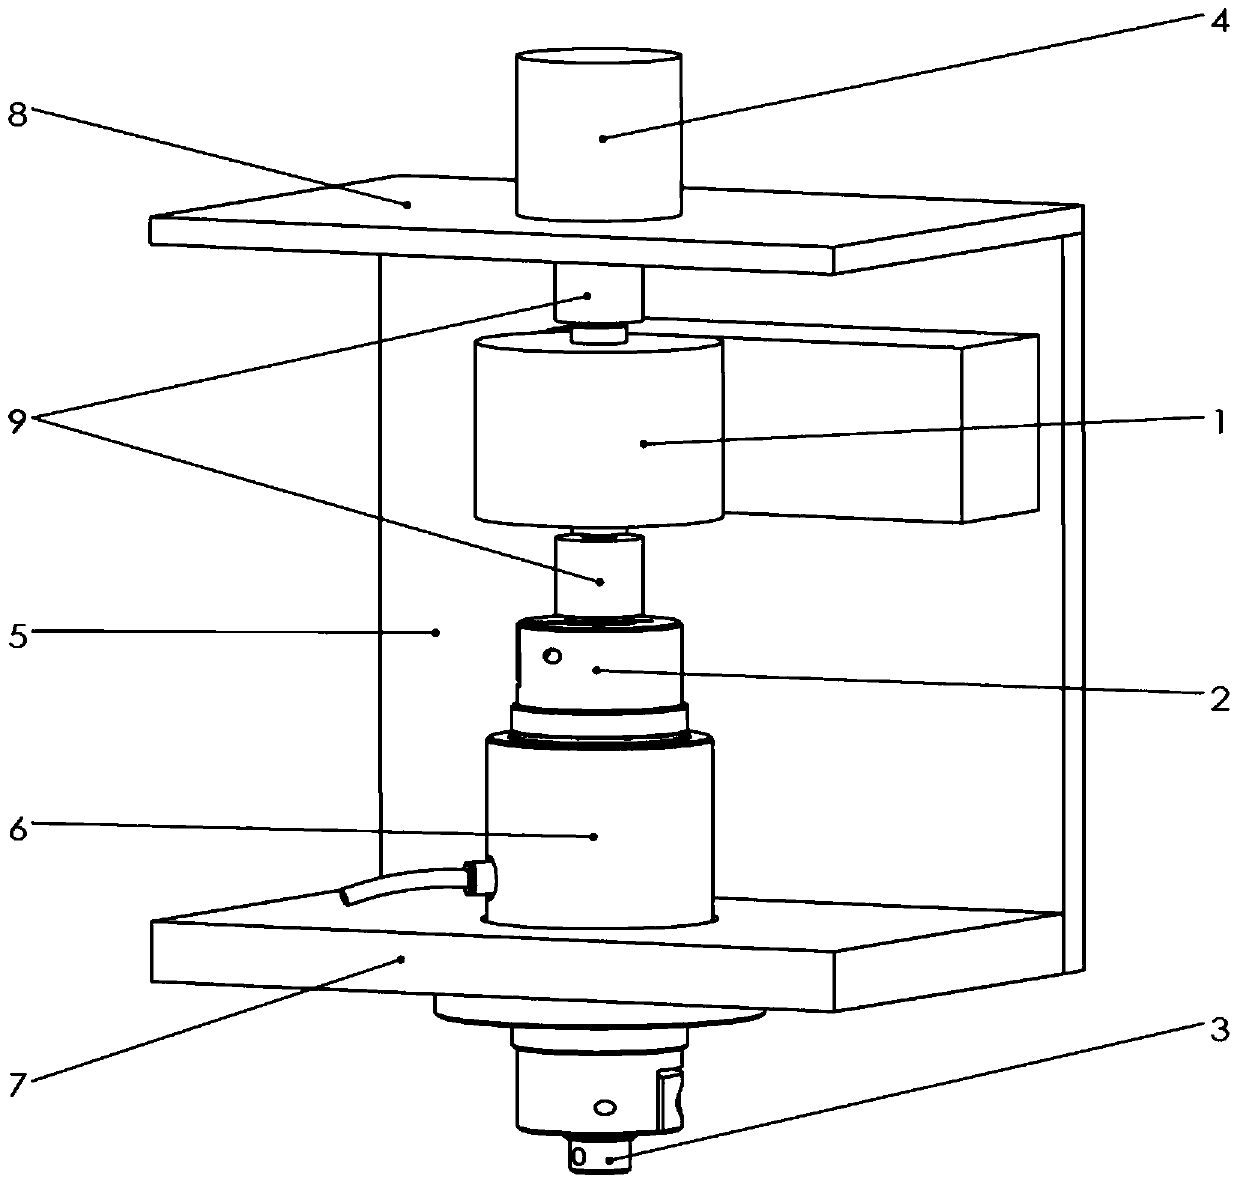 A torque measuring device and method for a miniature tensile torsion fatigue testing machine